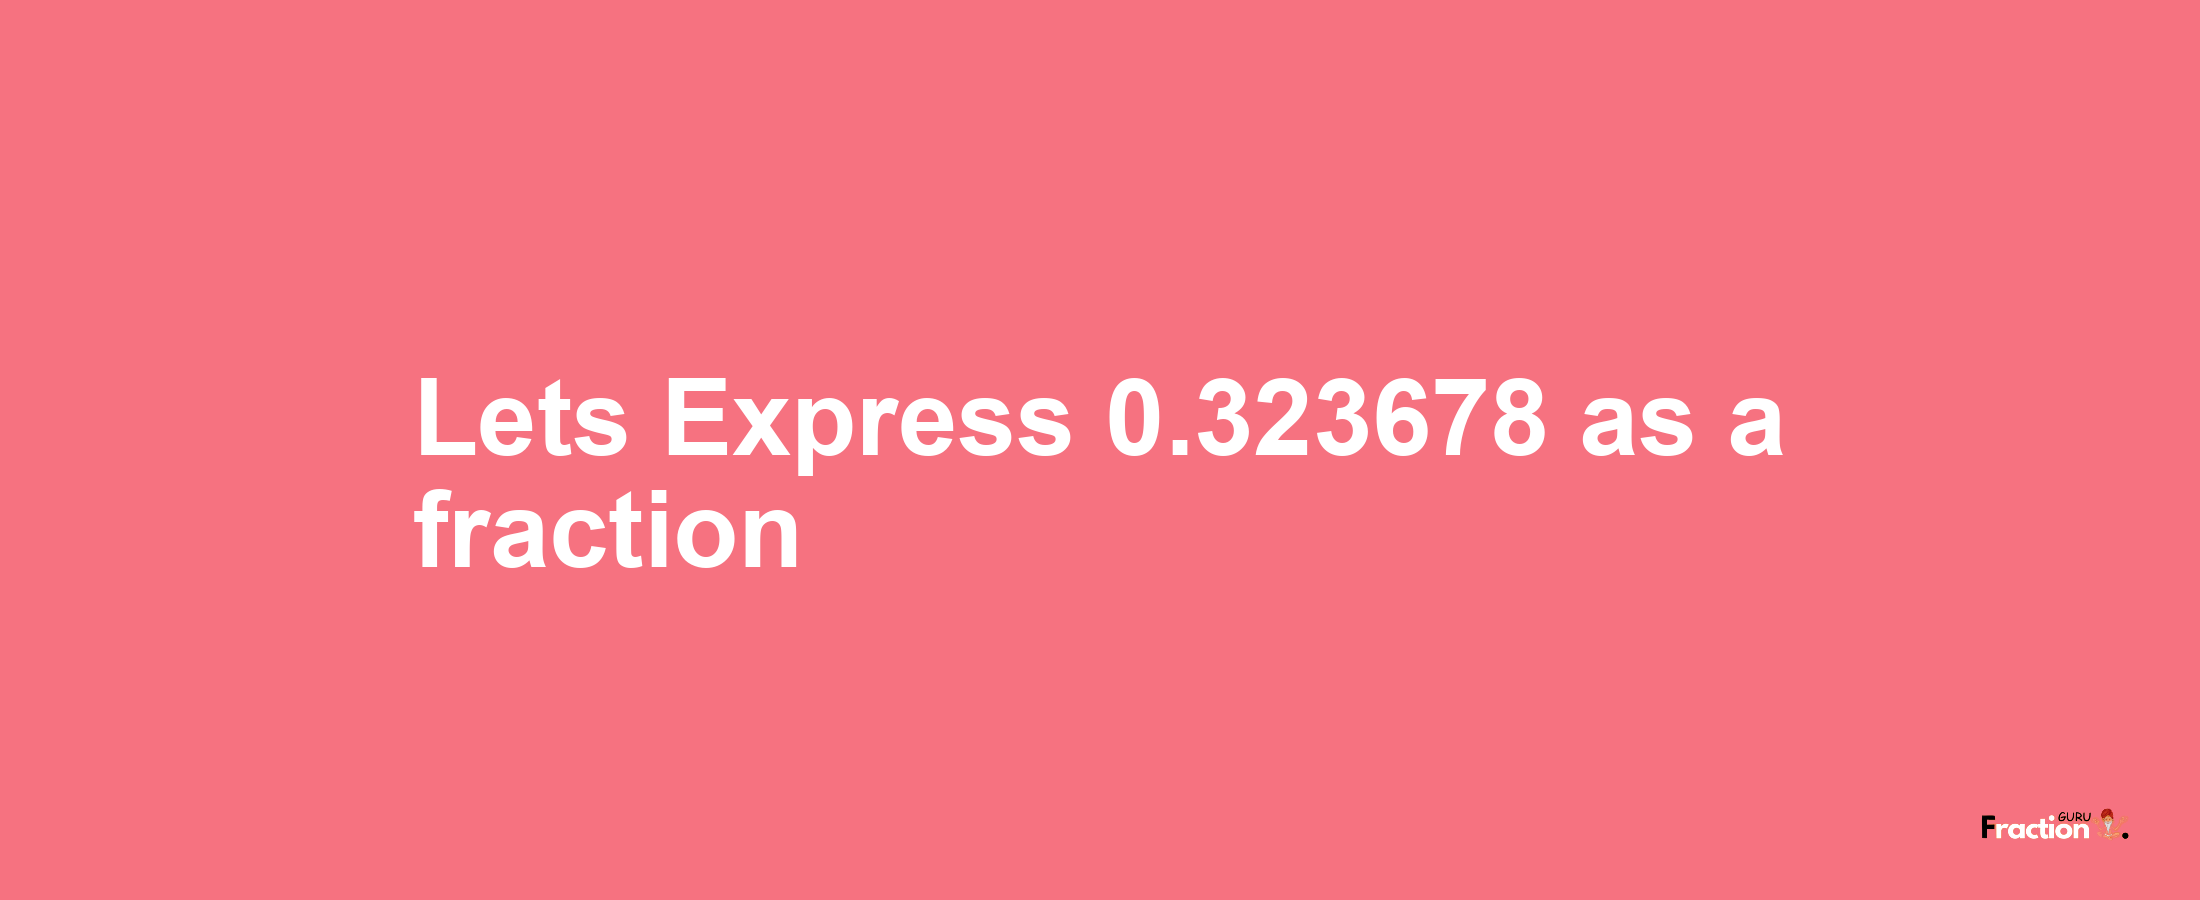 Lets Express 0.323678 as afraction